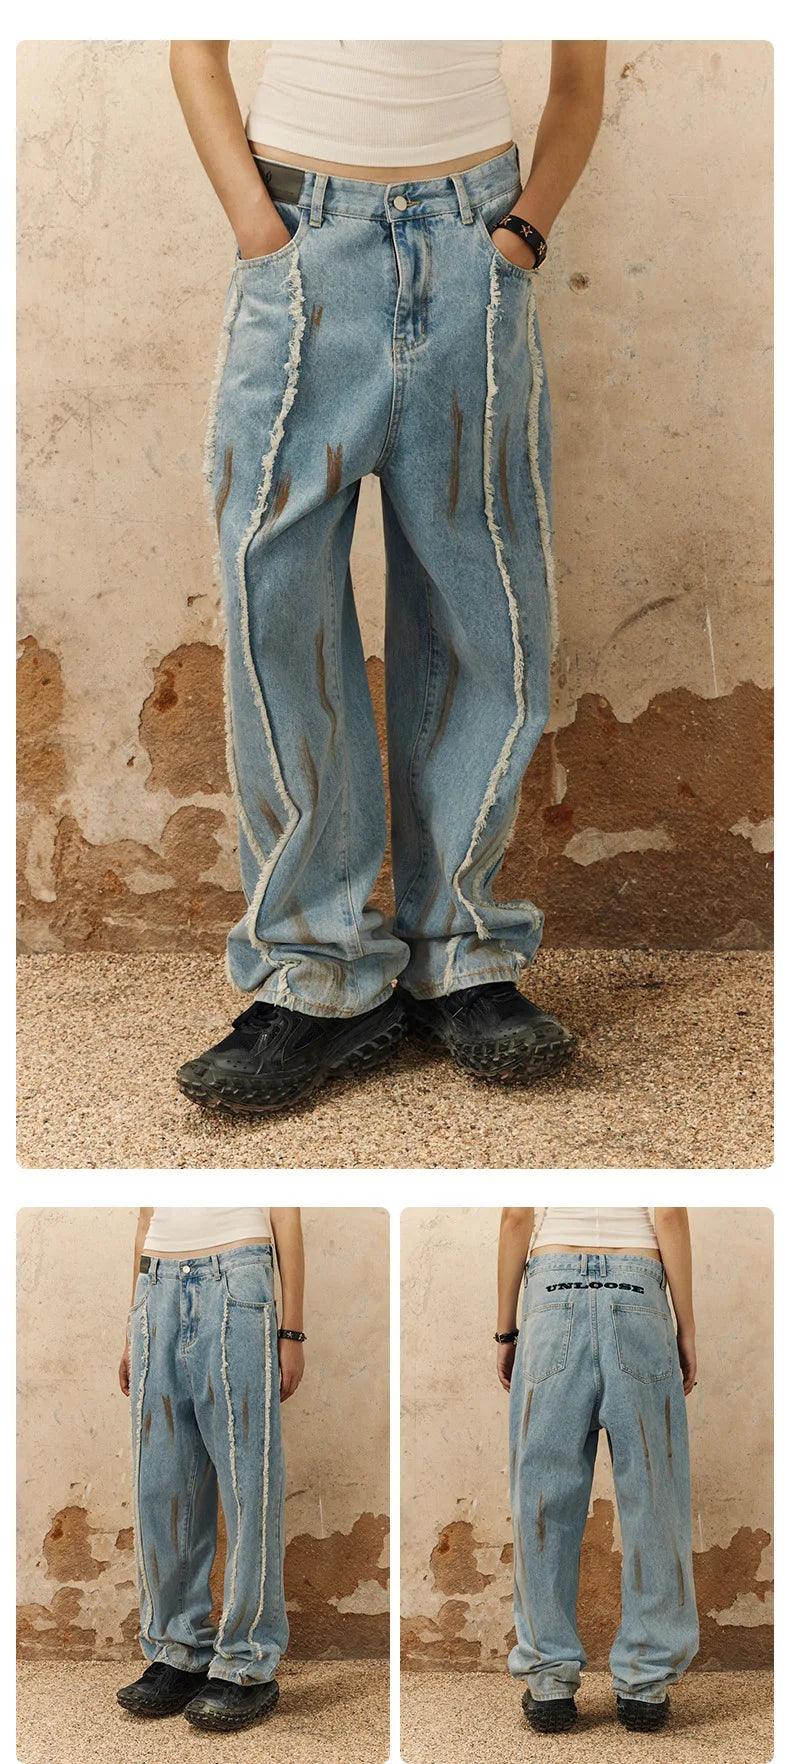 Raw Edge Design and Painted To Make Dirty Washing Jeans H084 - UncleDon JM